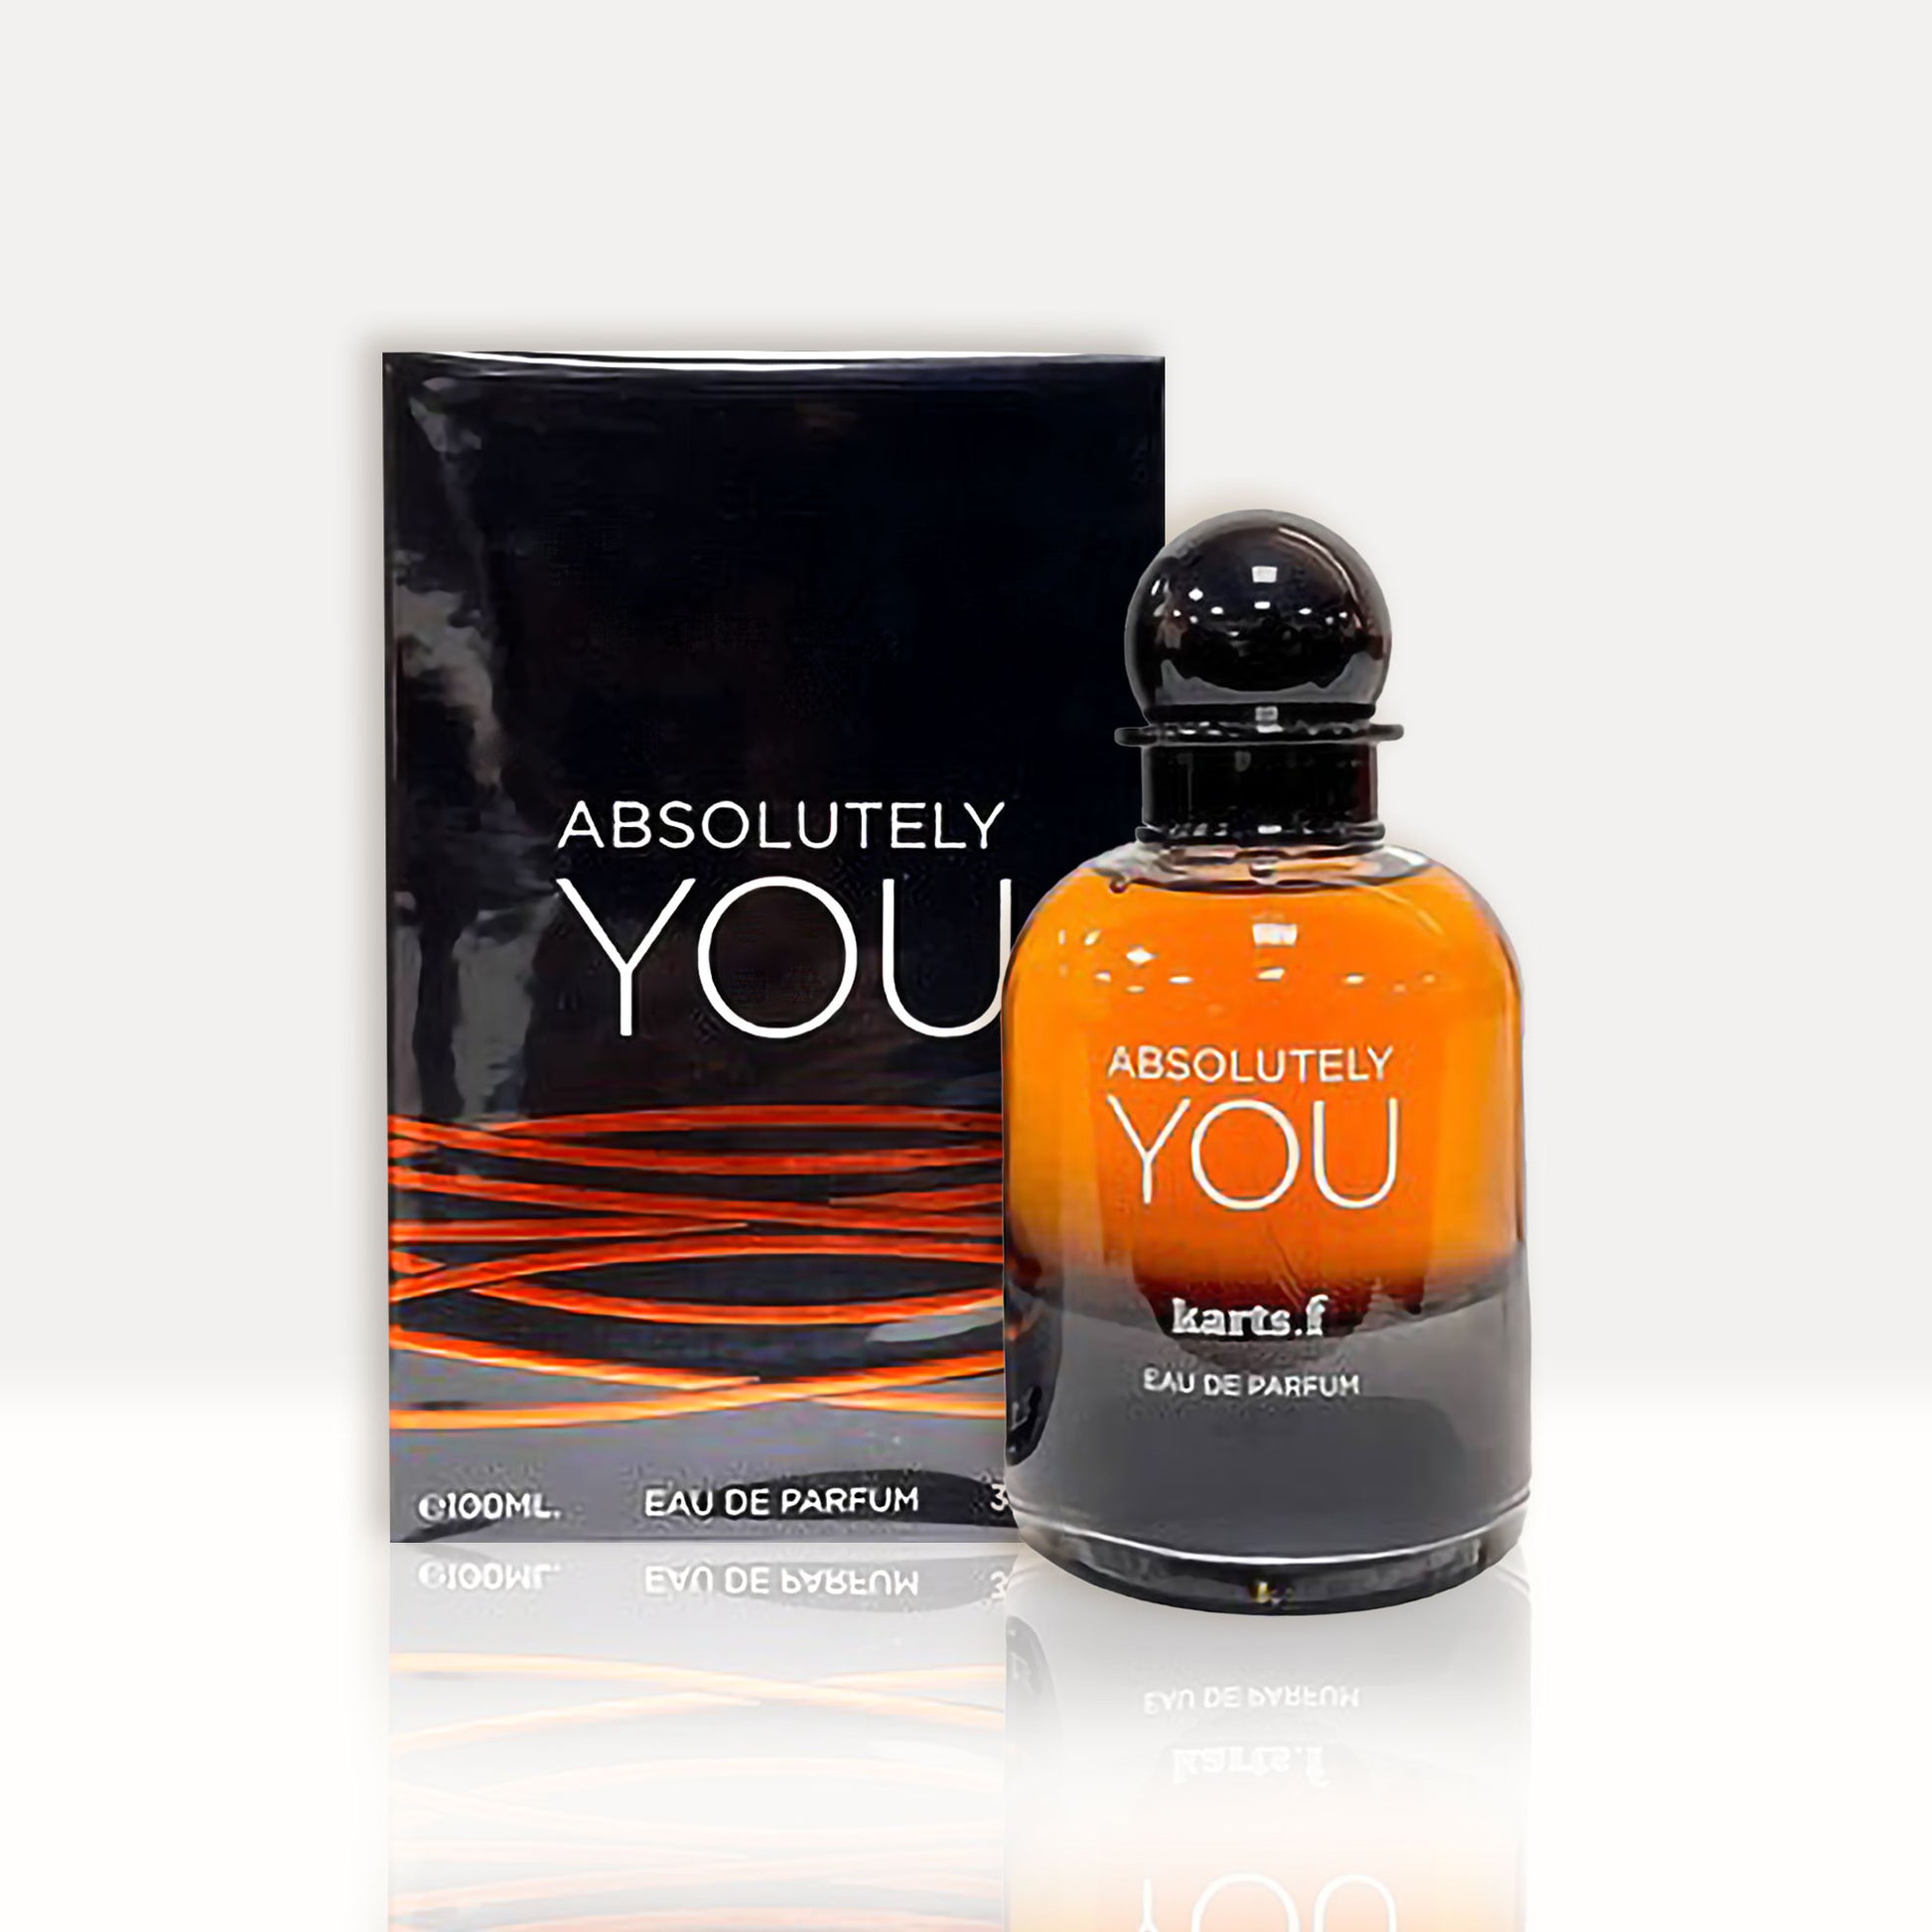 Absolutely You EDP Perfume - By Karts, Spicy Fruity Chestnut Amber Ceder Wood